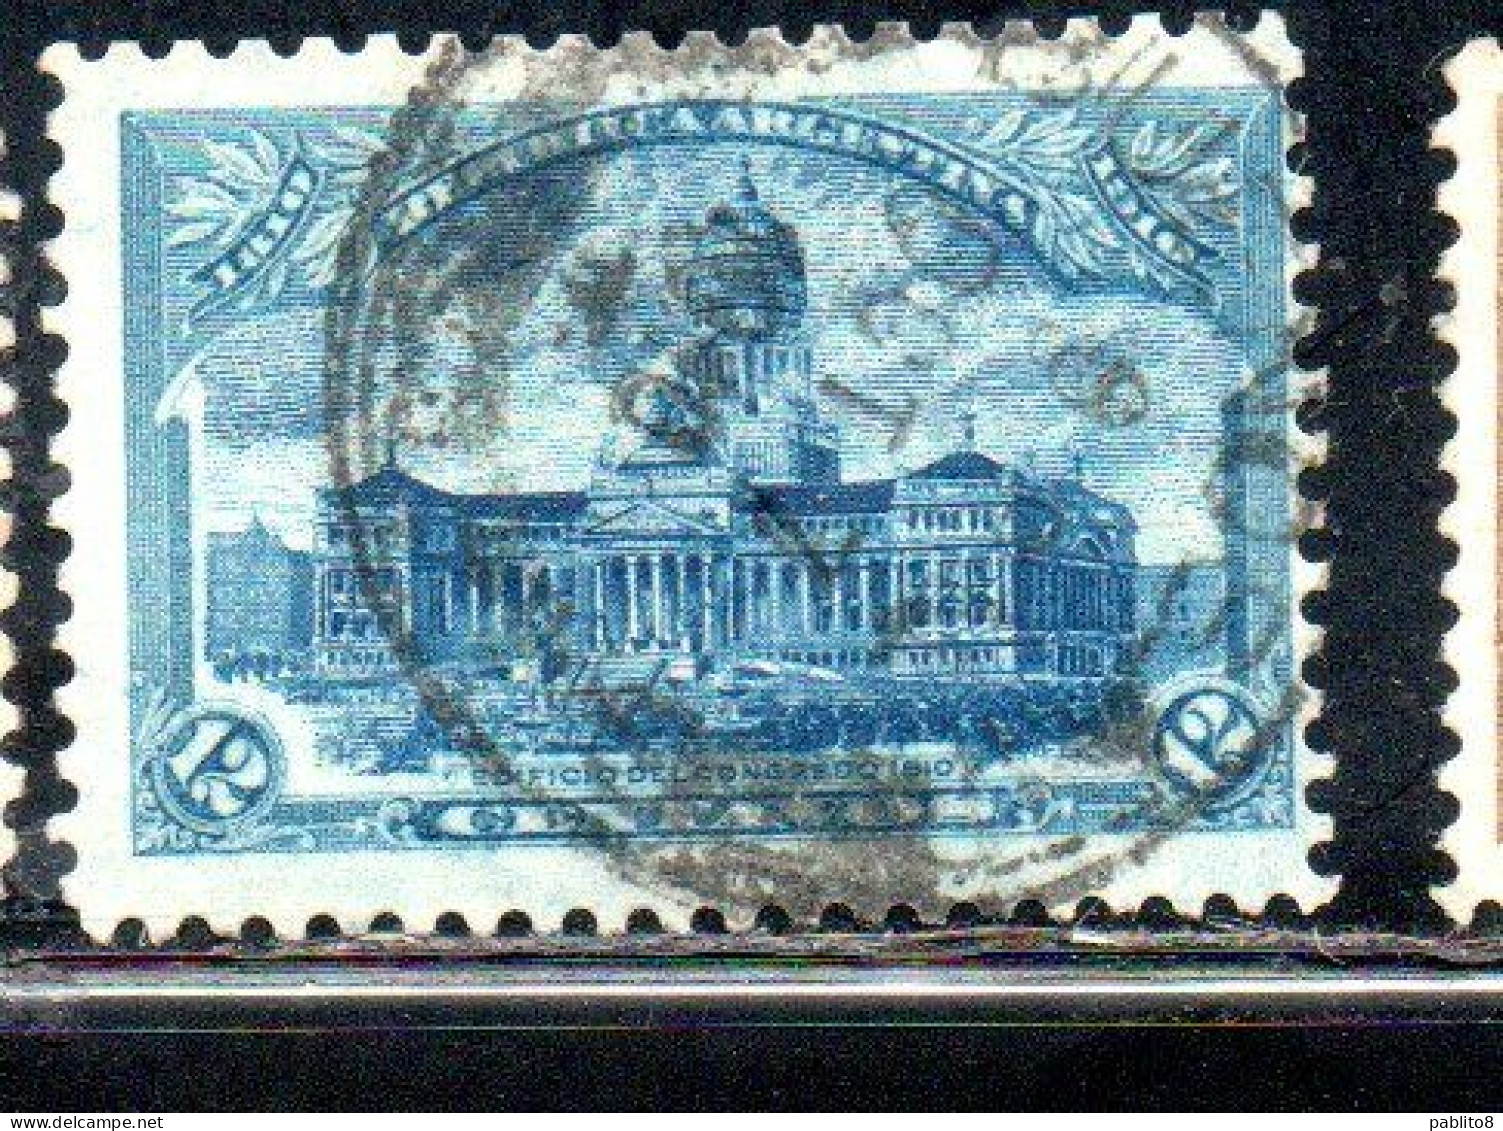 ARGENTINA 1910 CONGRESS BUILDINGS 12c USED USADO OBLITERE' - Used Stamps